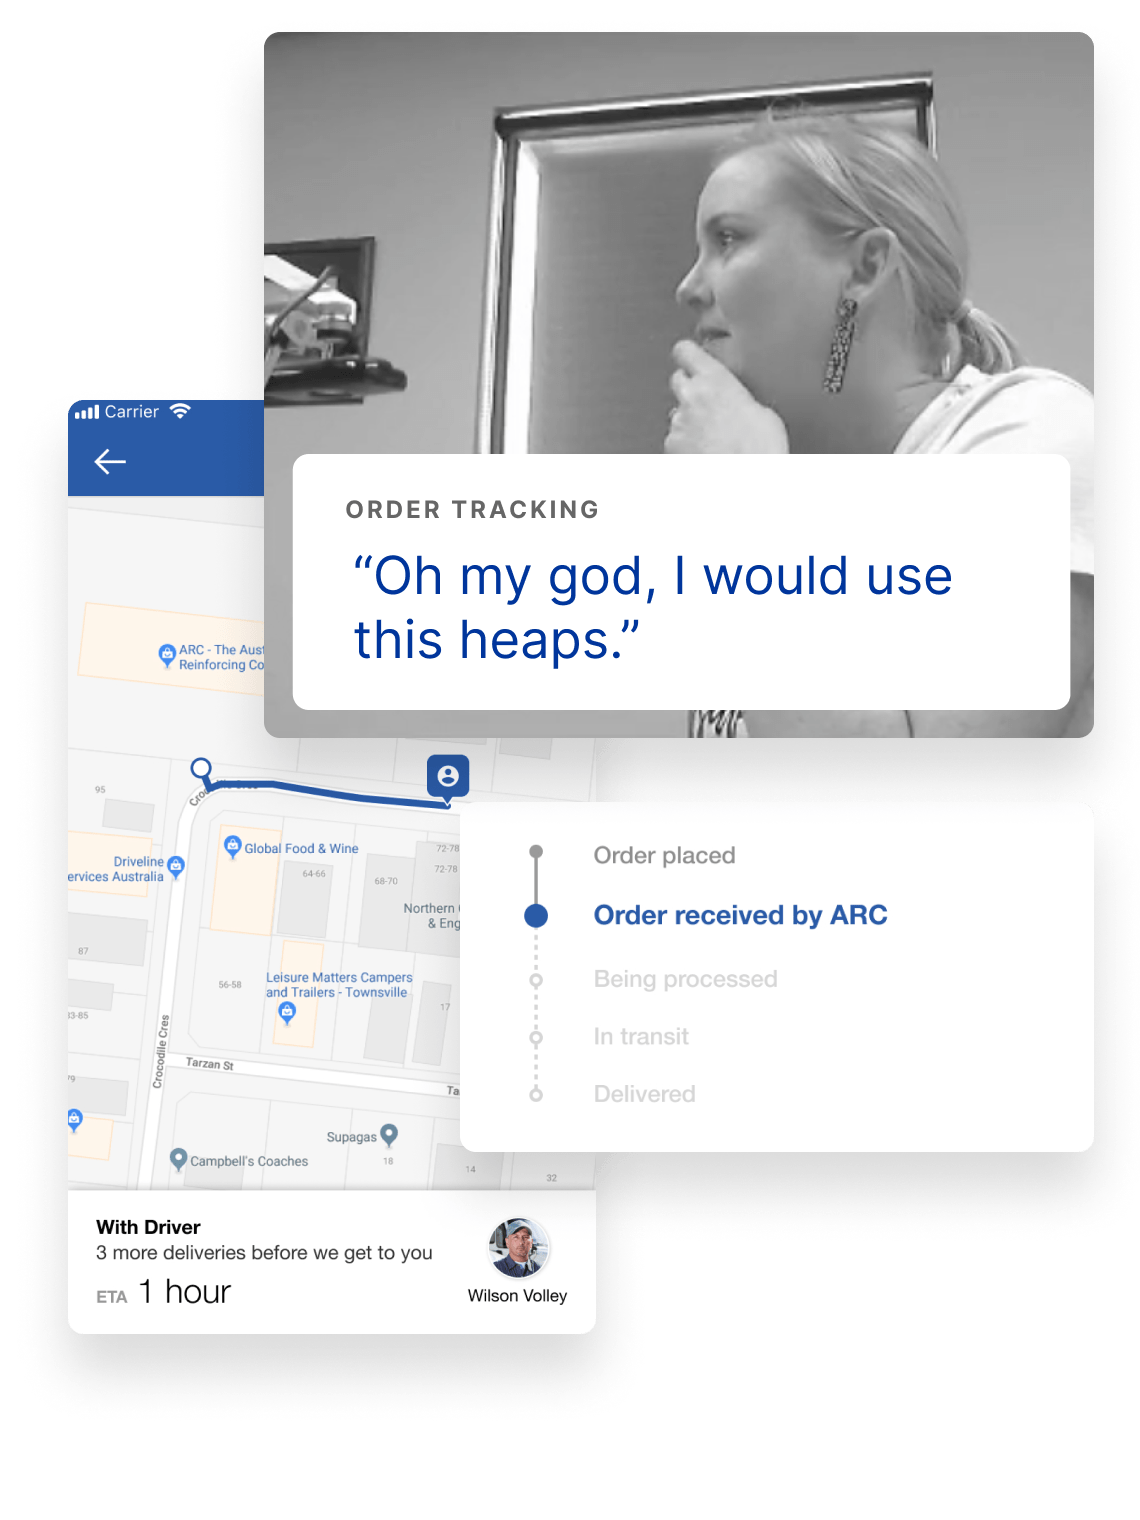 App screen and image of woman with a quote caption: "Oh my god, I would use this heaps."